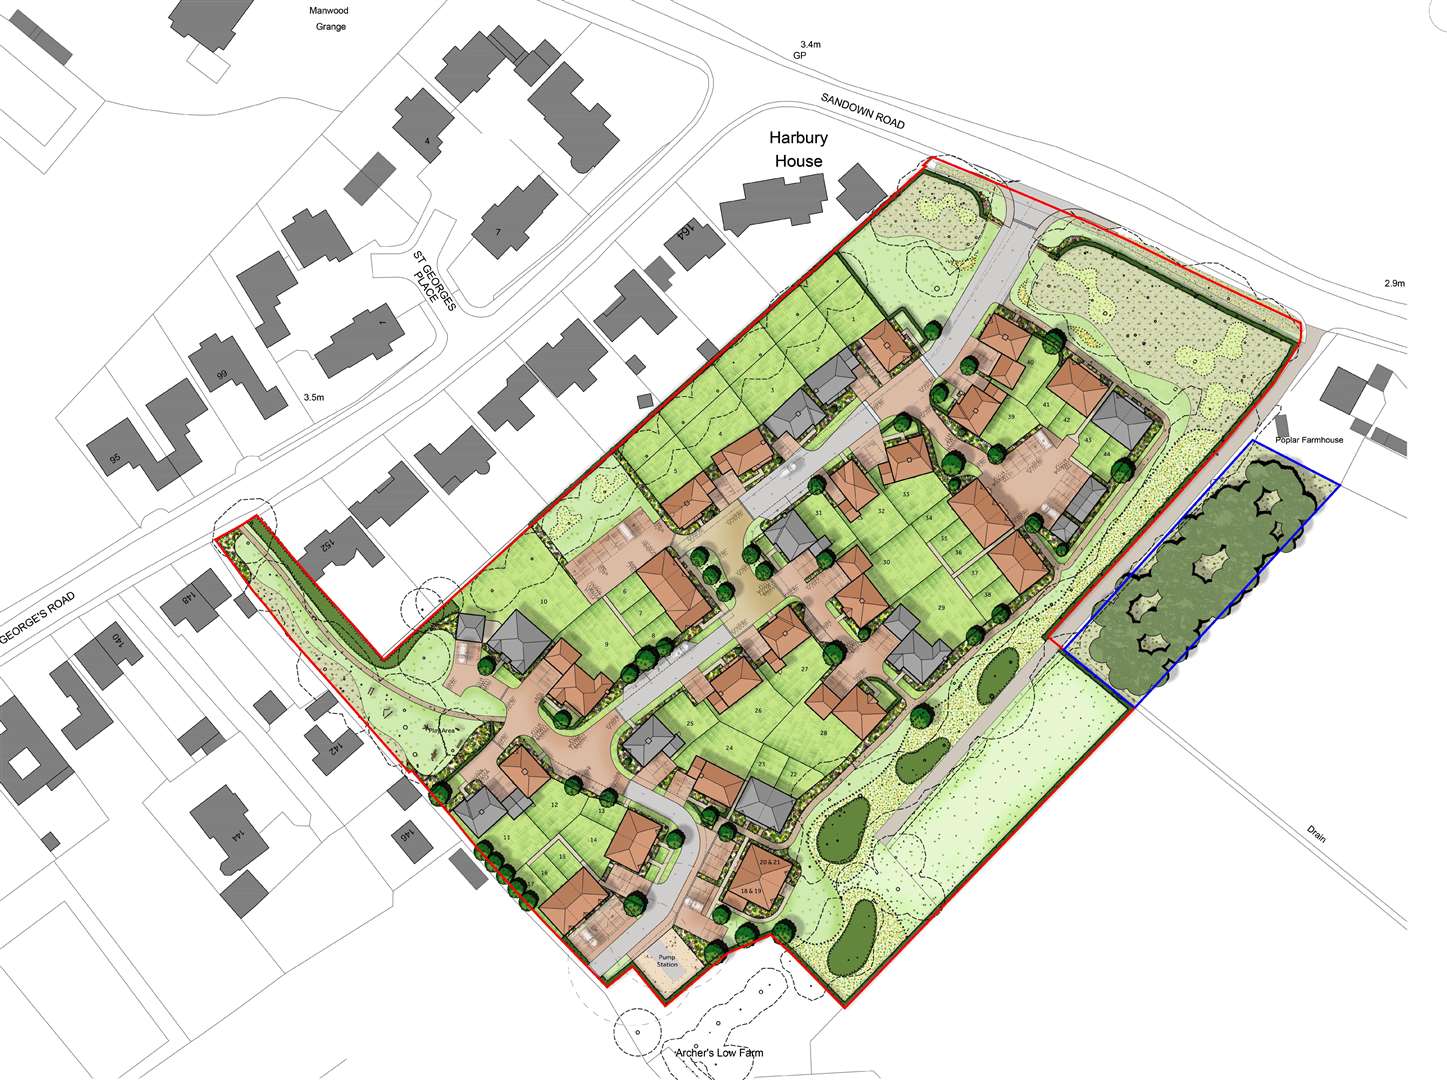 Fernham Homes wants to build 44 homes on land at Archers Low Farm in Sandwich. Picture: Clague Architrcts